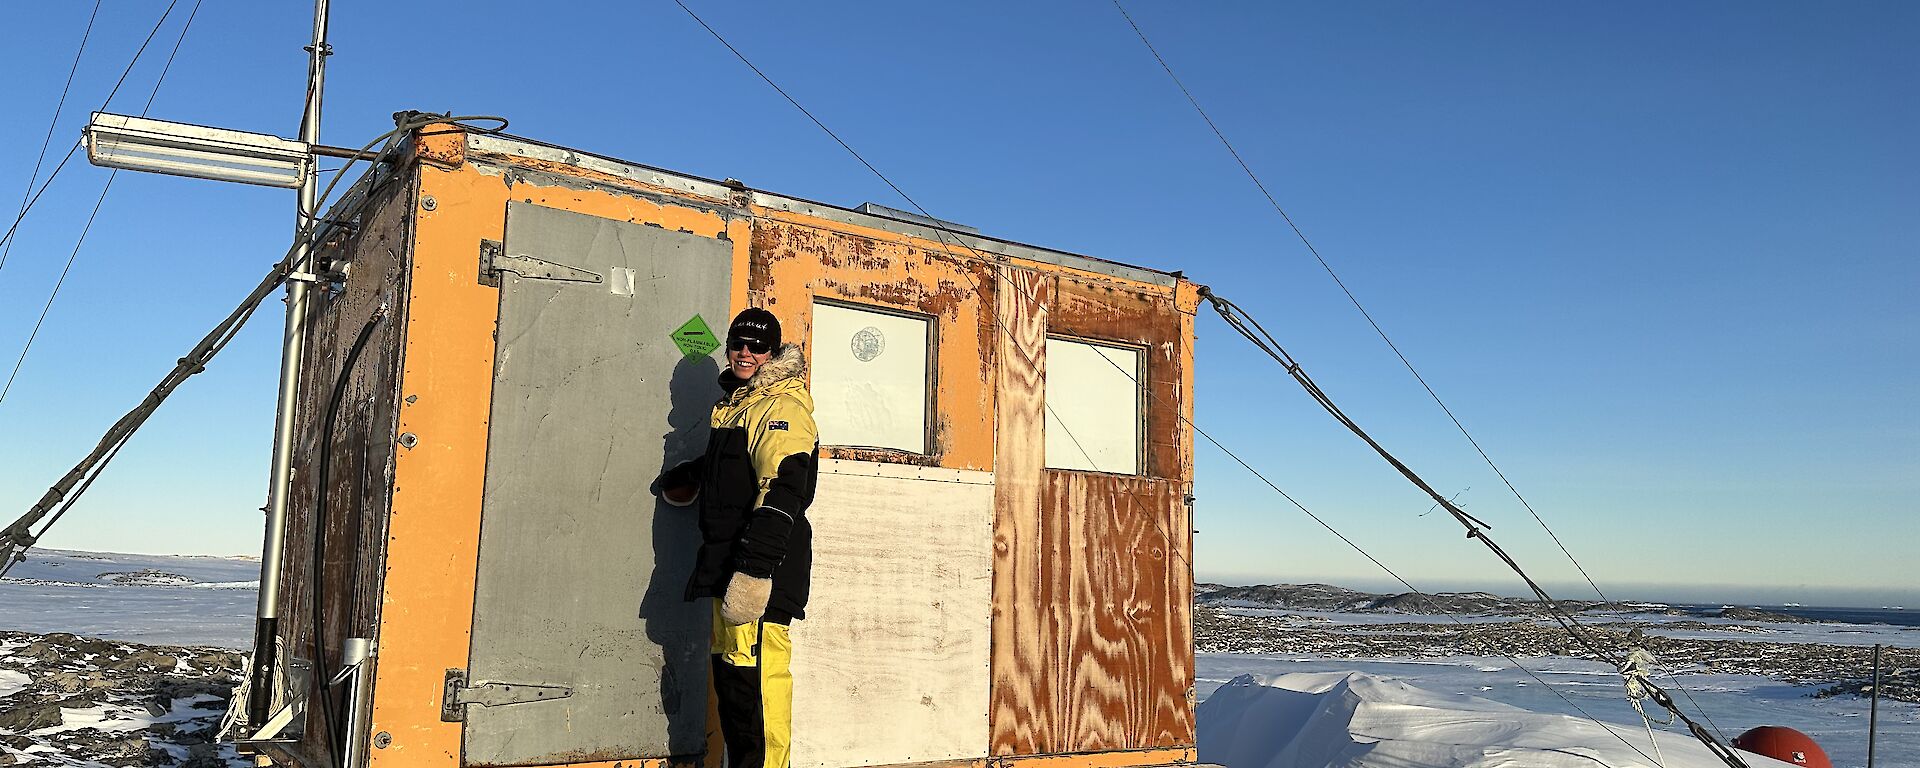 A small wooden hut that stands on a rocky hilltop, elevated on stumps. The hut is anchored to the ground with steel cables and is constructed of bare plywood. A woman stands in front of the closed door, dressed in yellow cold weather clothing and smiling back at the camera.